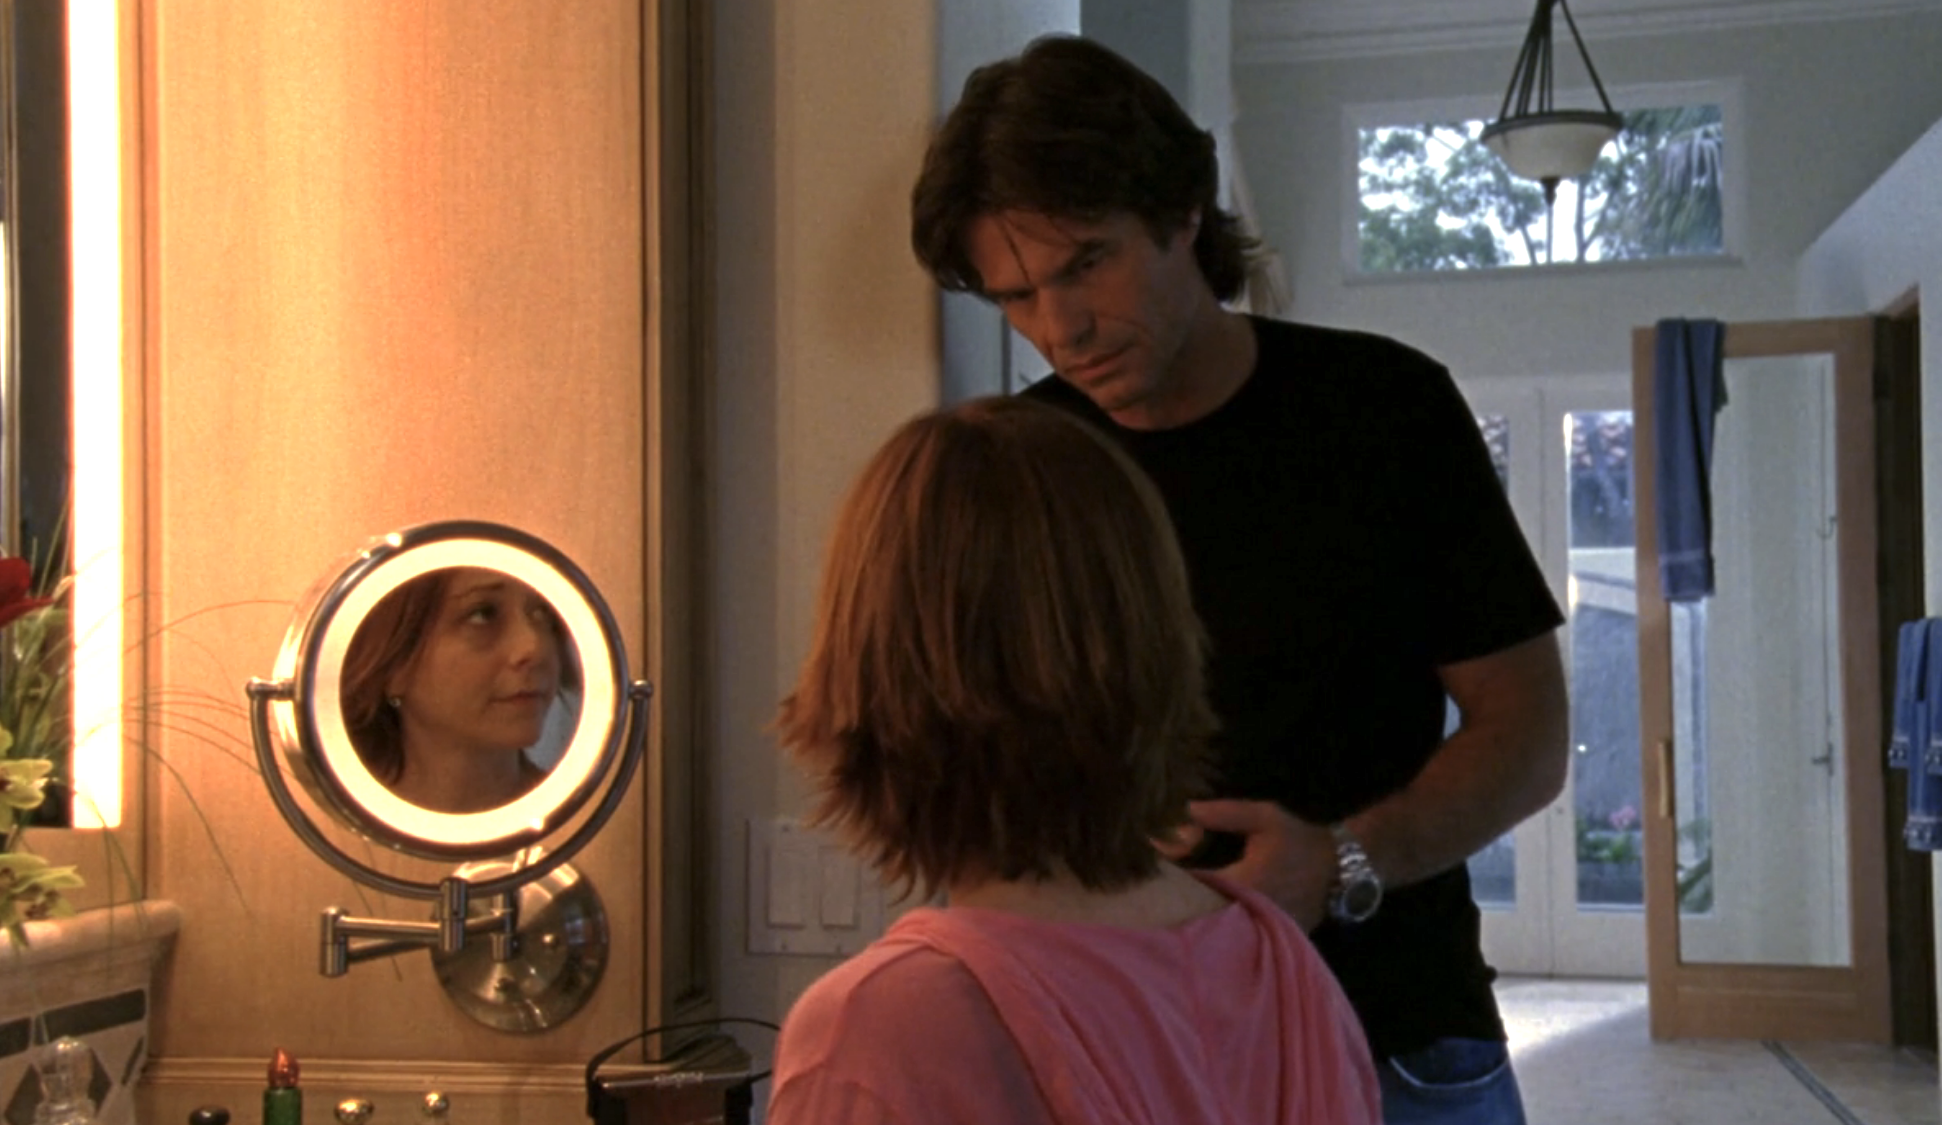 Screenshot from Veronica Mars S1E19. A young white woman, Trina, in a pink hoodie is sitting at a mirror, her back to the camera. We can see her face in the mirror. She has one black eye. Her father Aaron, a middle aged white man in a black tee is standing over her, looking concerned. 